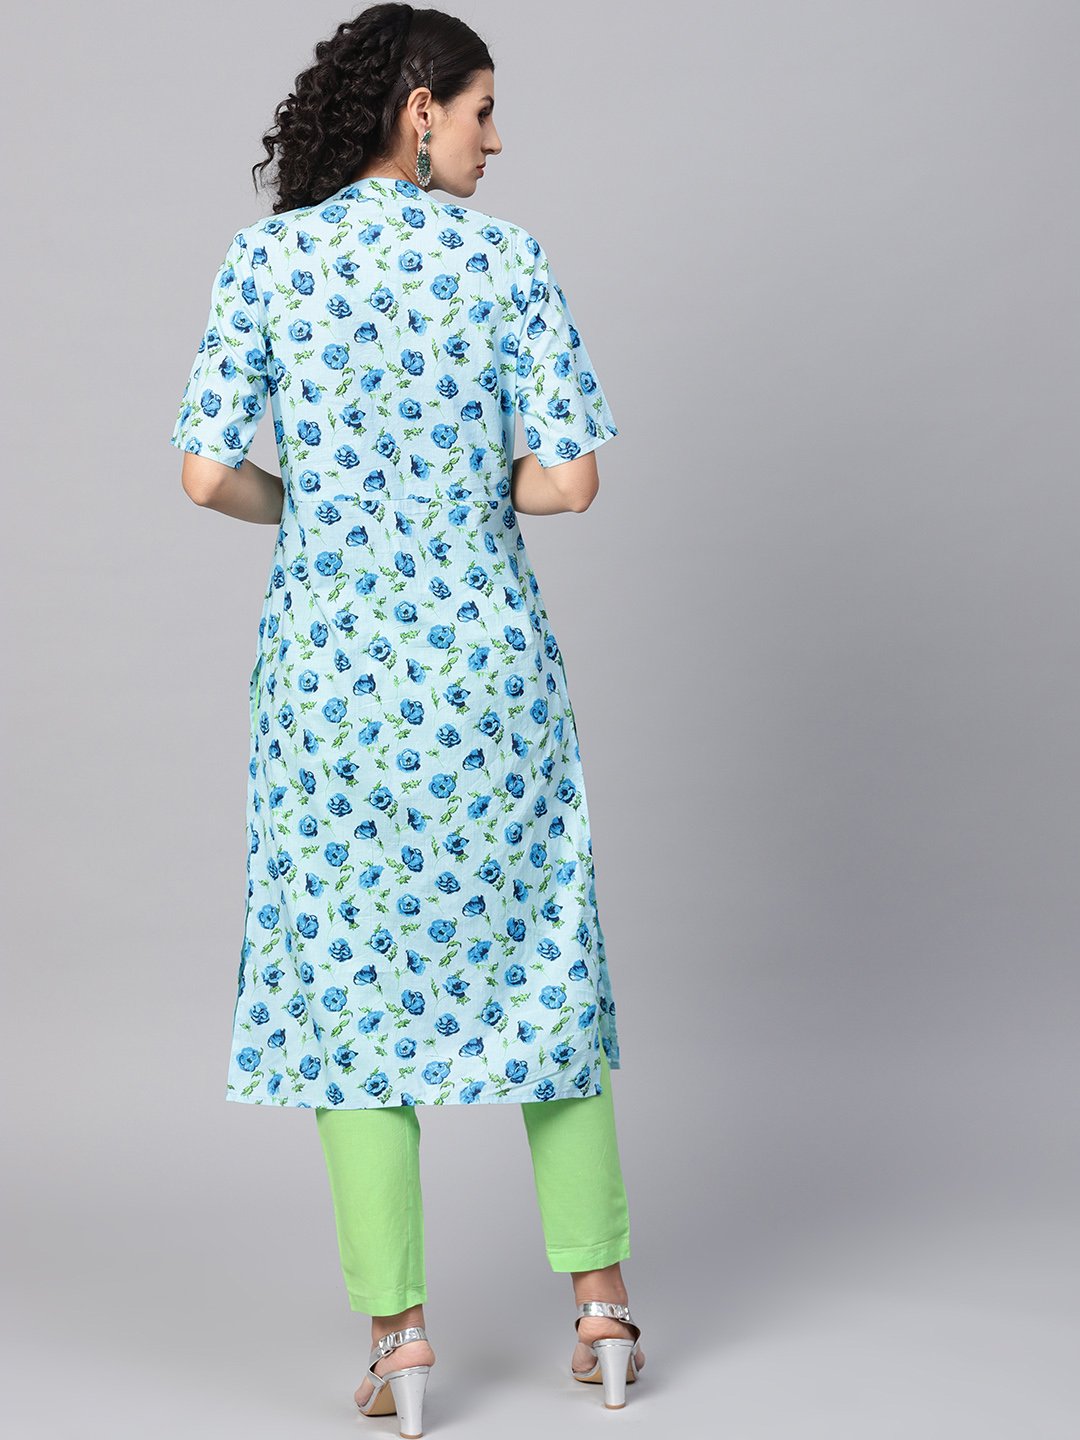 Women's Cotton Light Blue Floral Printed Kurta Set With Solid Light Green Pants - Nayo Clothing